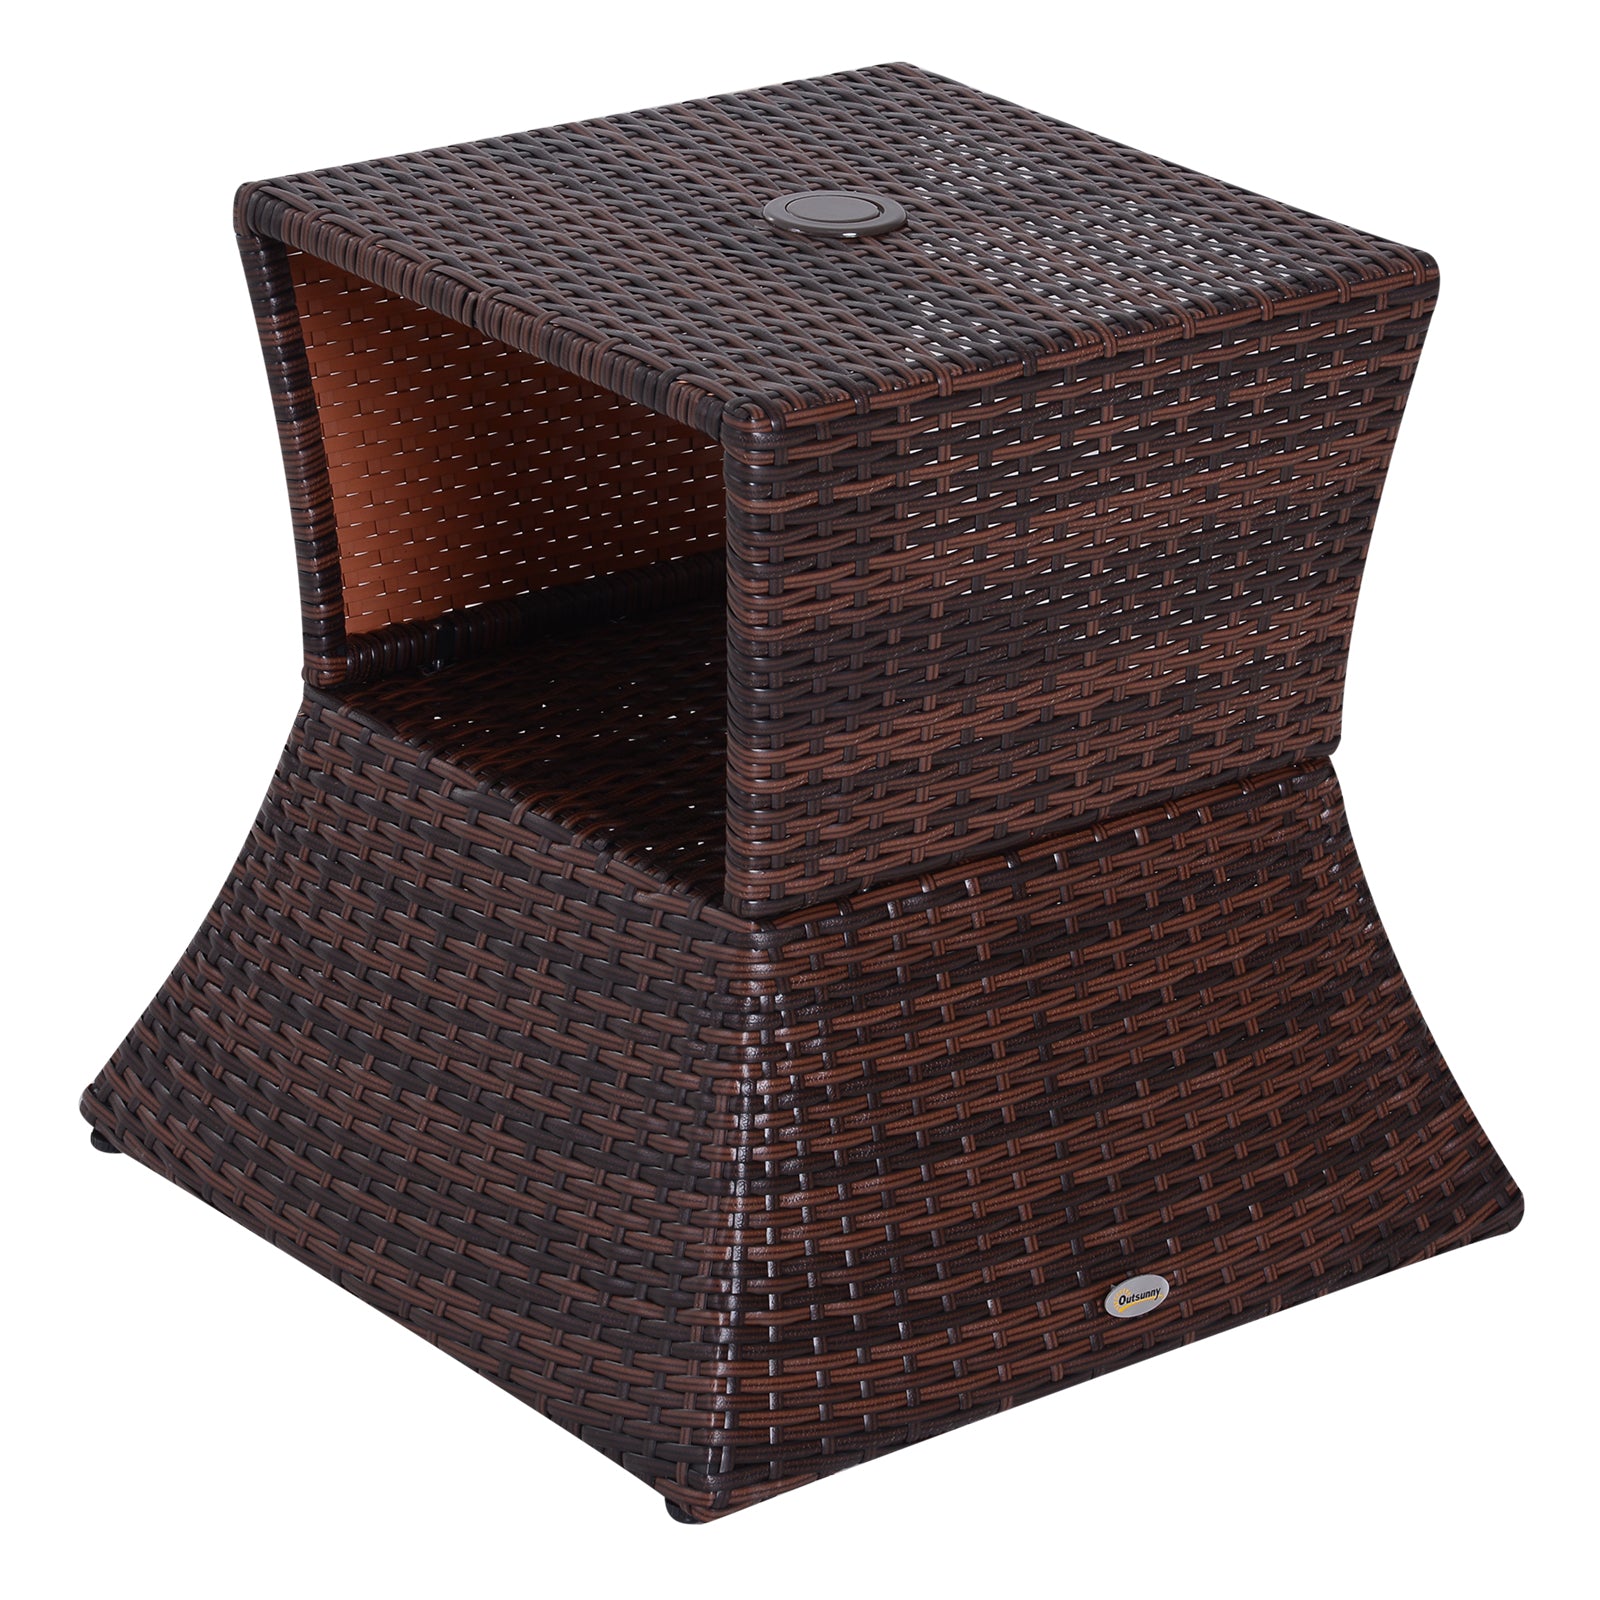 Outsunny Outdoor Patio Rattan Wicker Coffee Table Bistro Side Table w/ Umbrella Hole and Storage Space, Brown